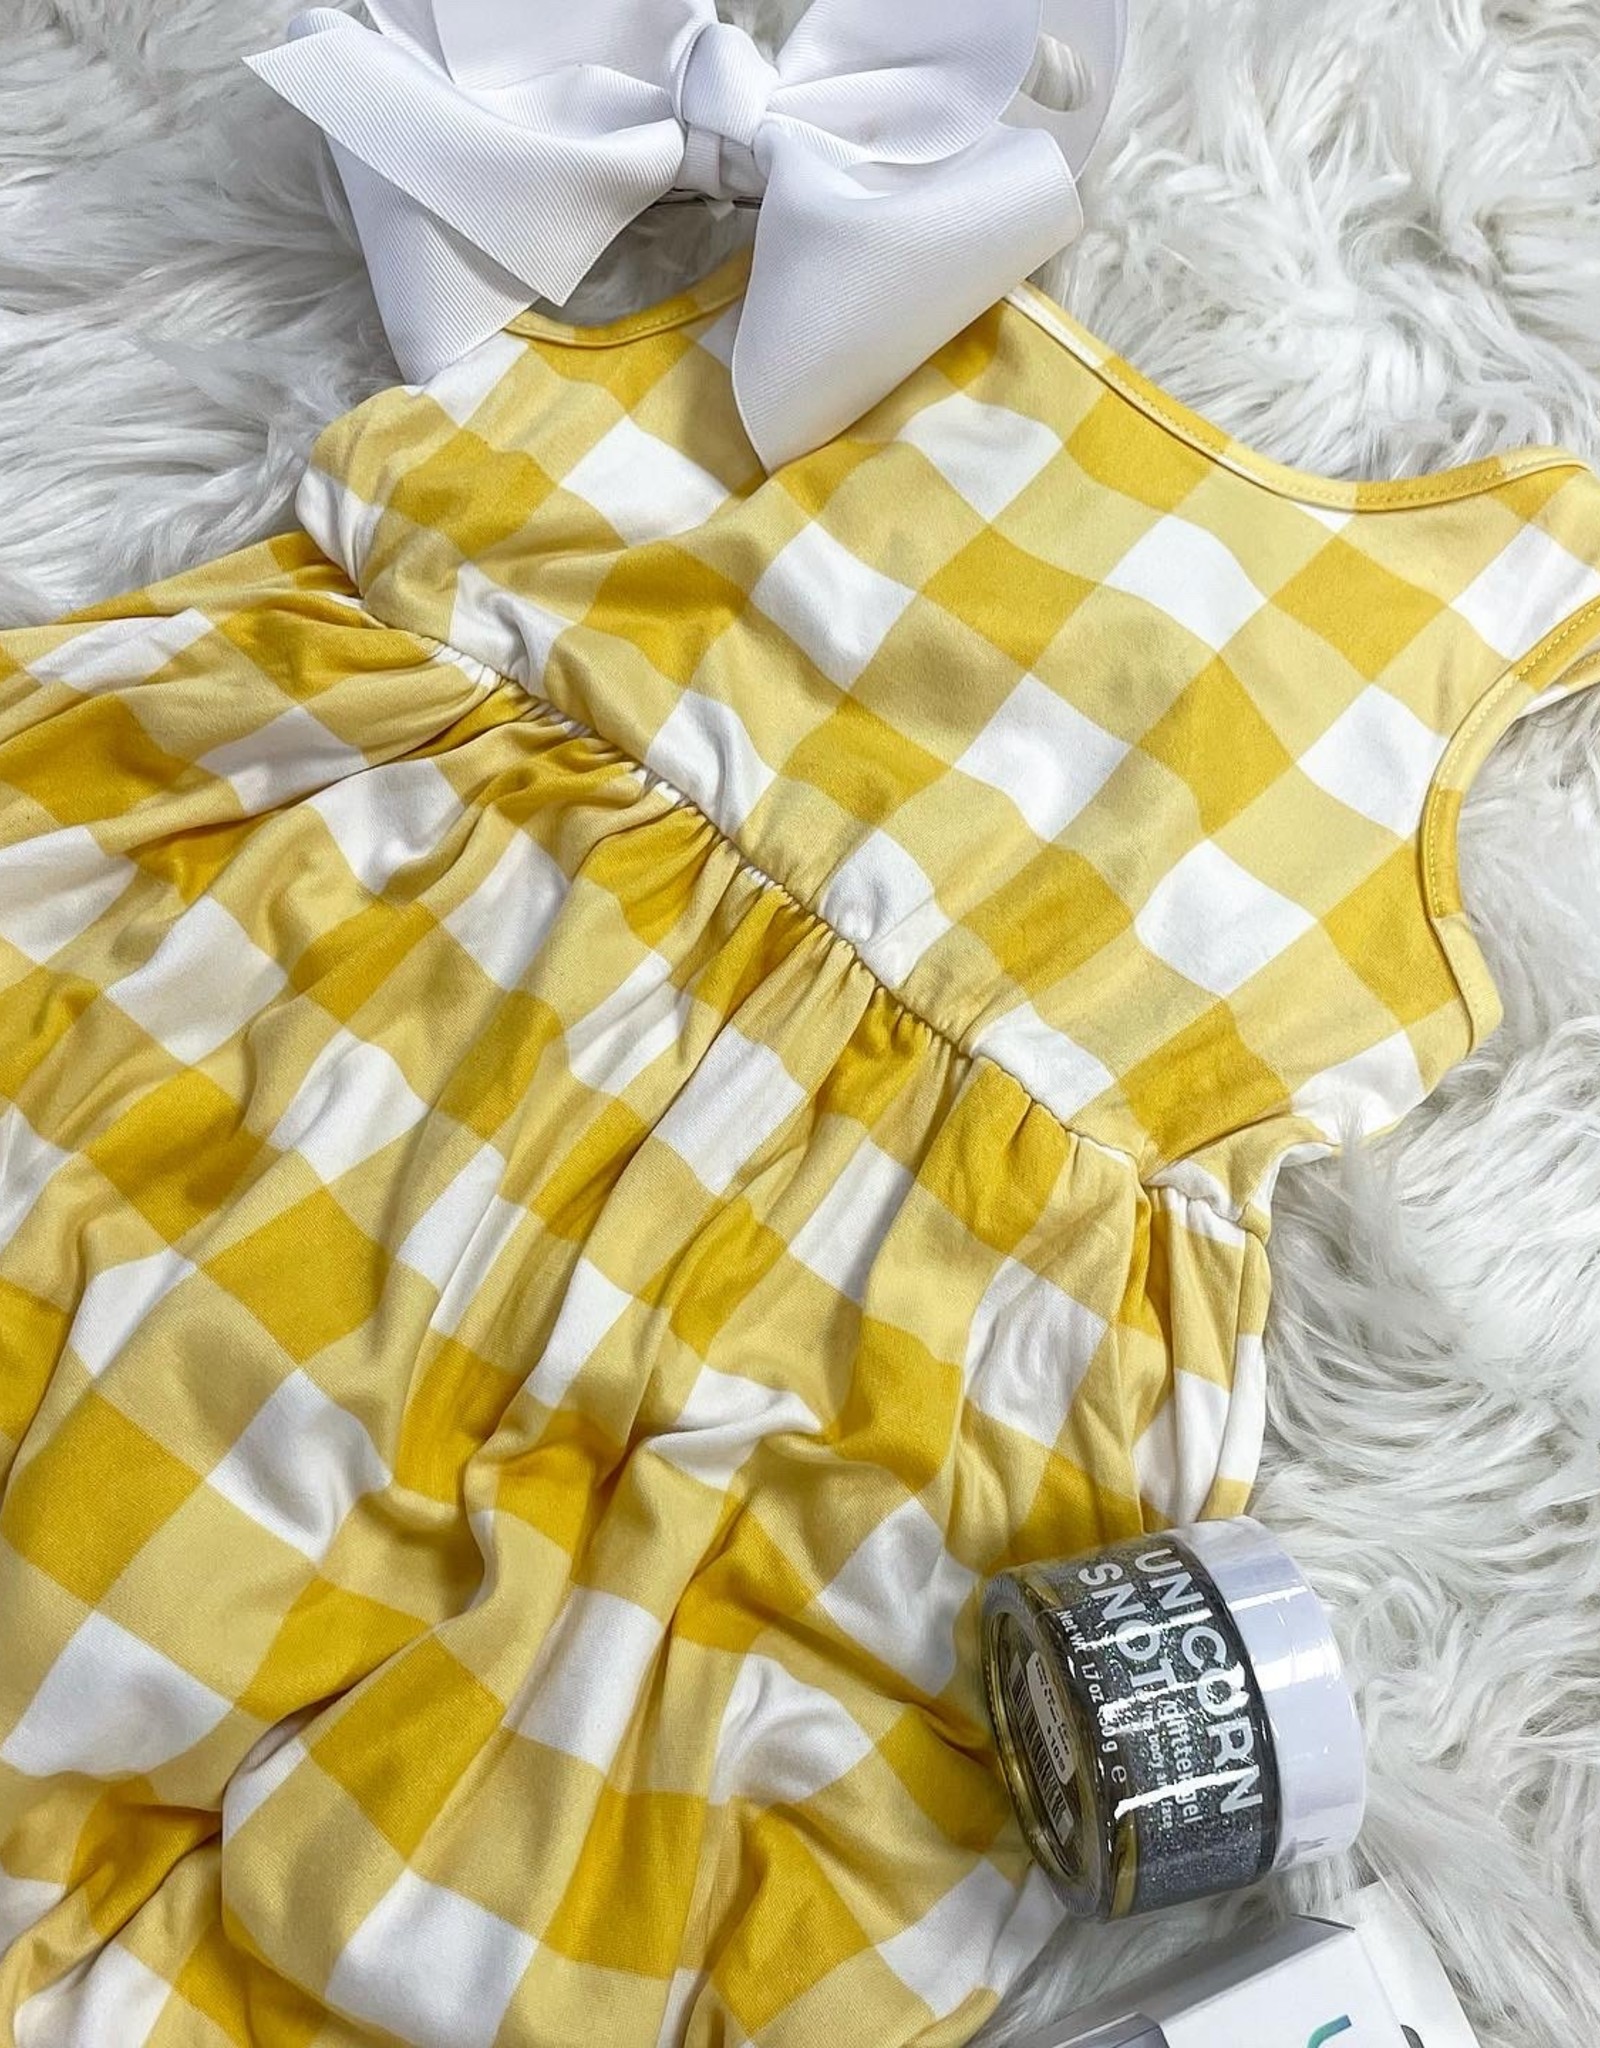 Maddie Dress in Yellow Gingham